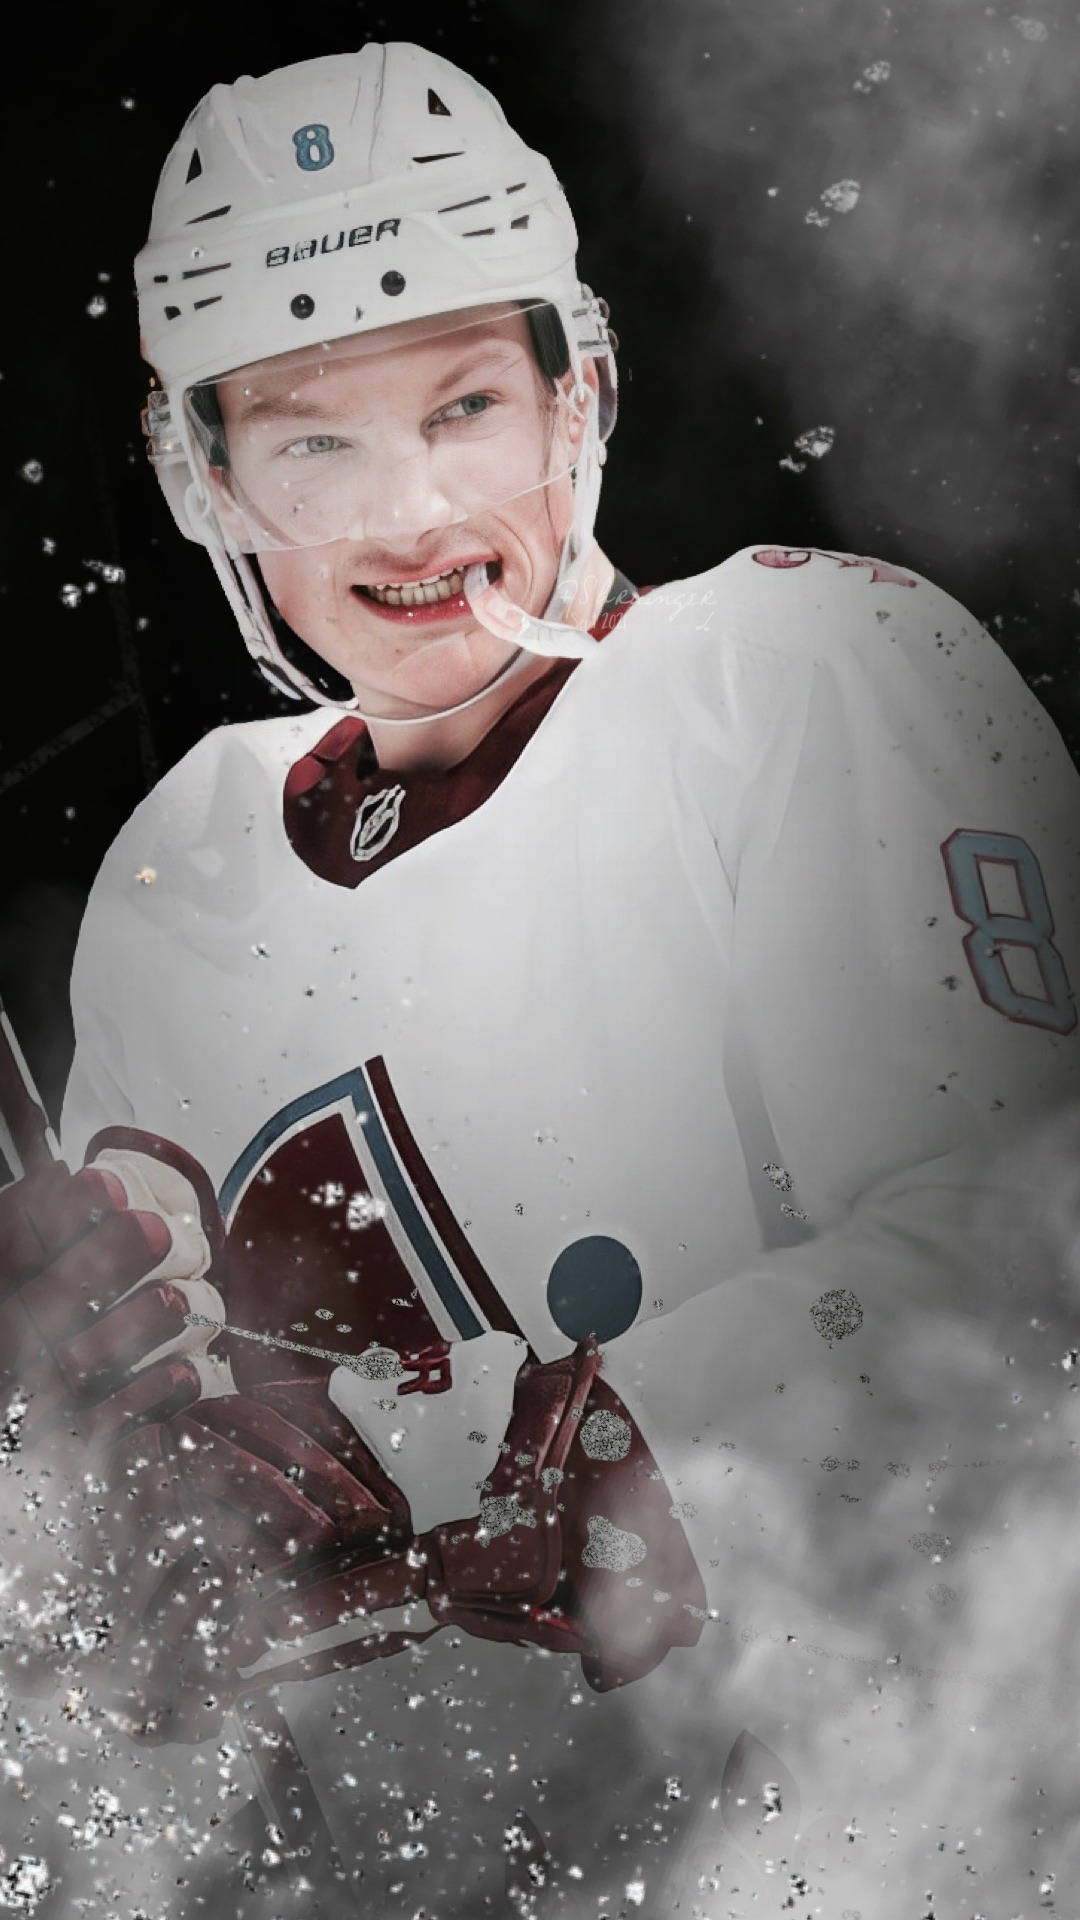 Avalanche Background Wallpaper